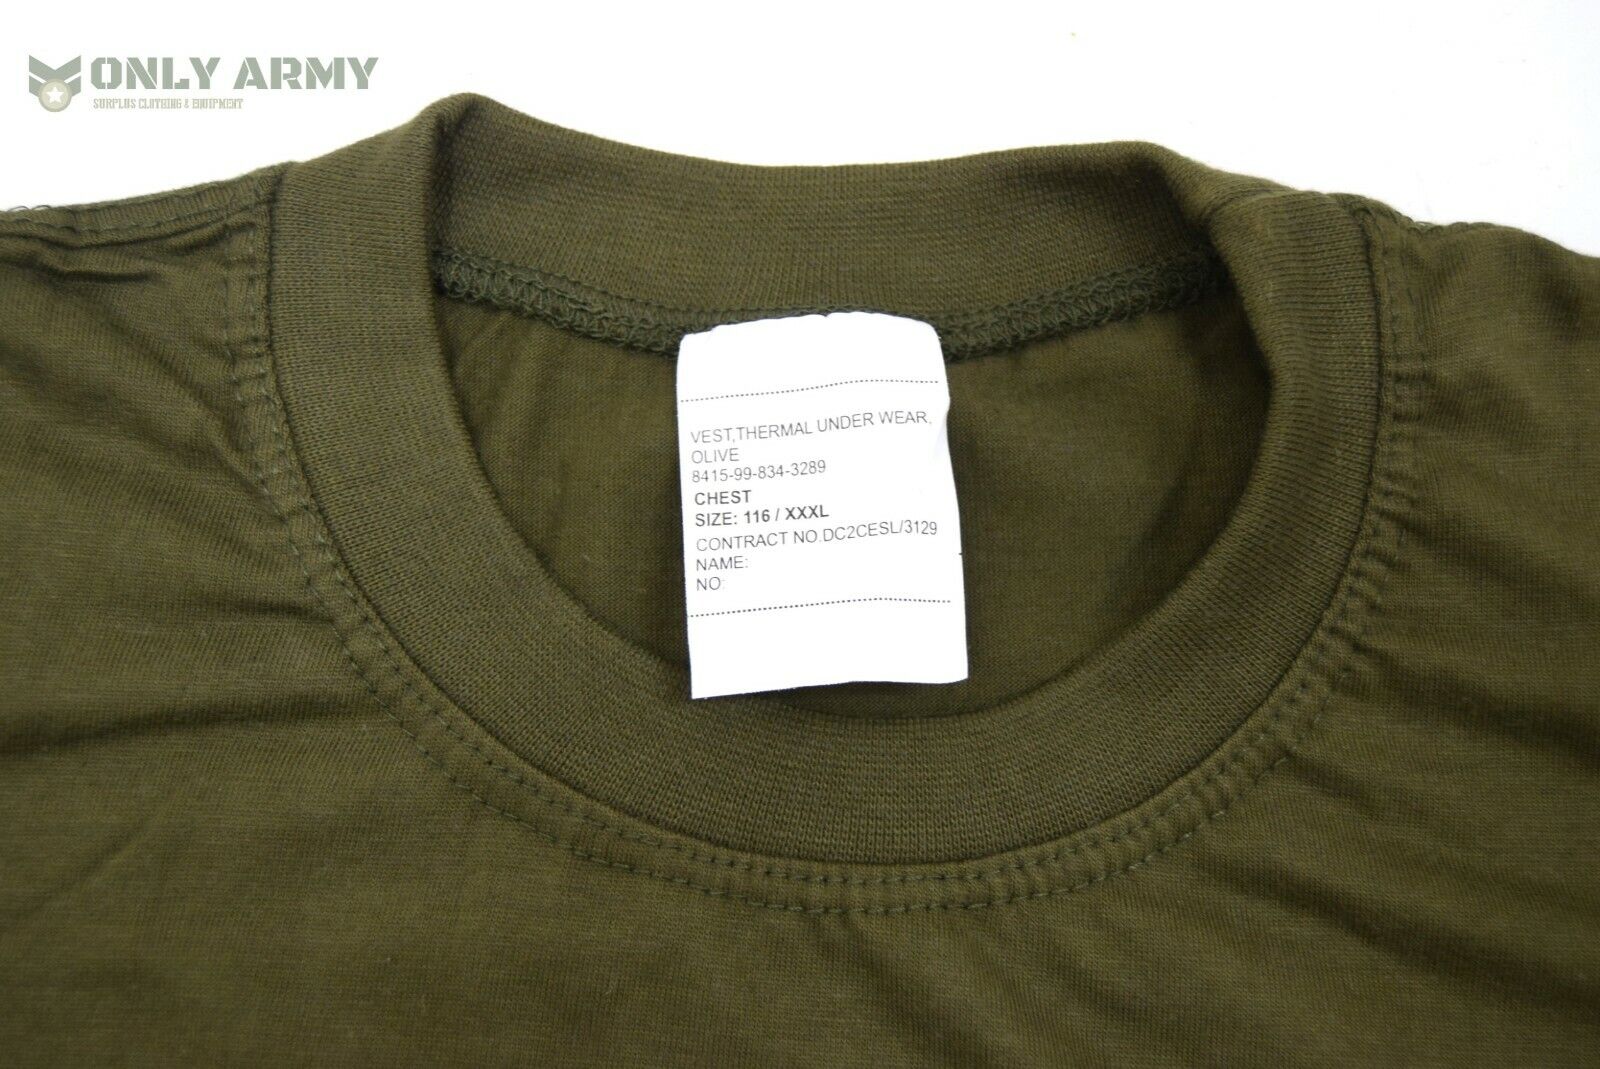 British Army Olive Long Sleeve Top T Shirt Thermal Underwear Base Layer T'shirt